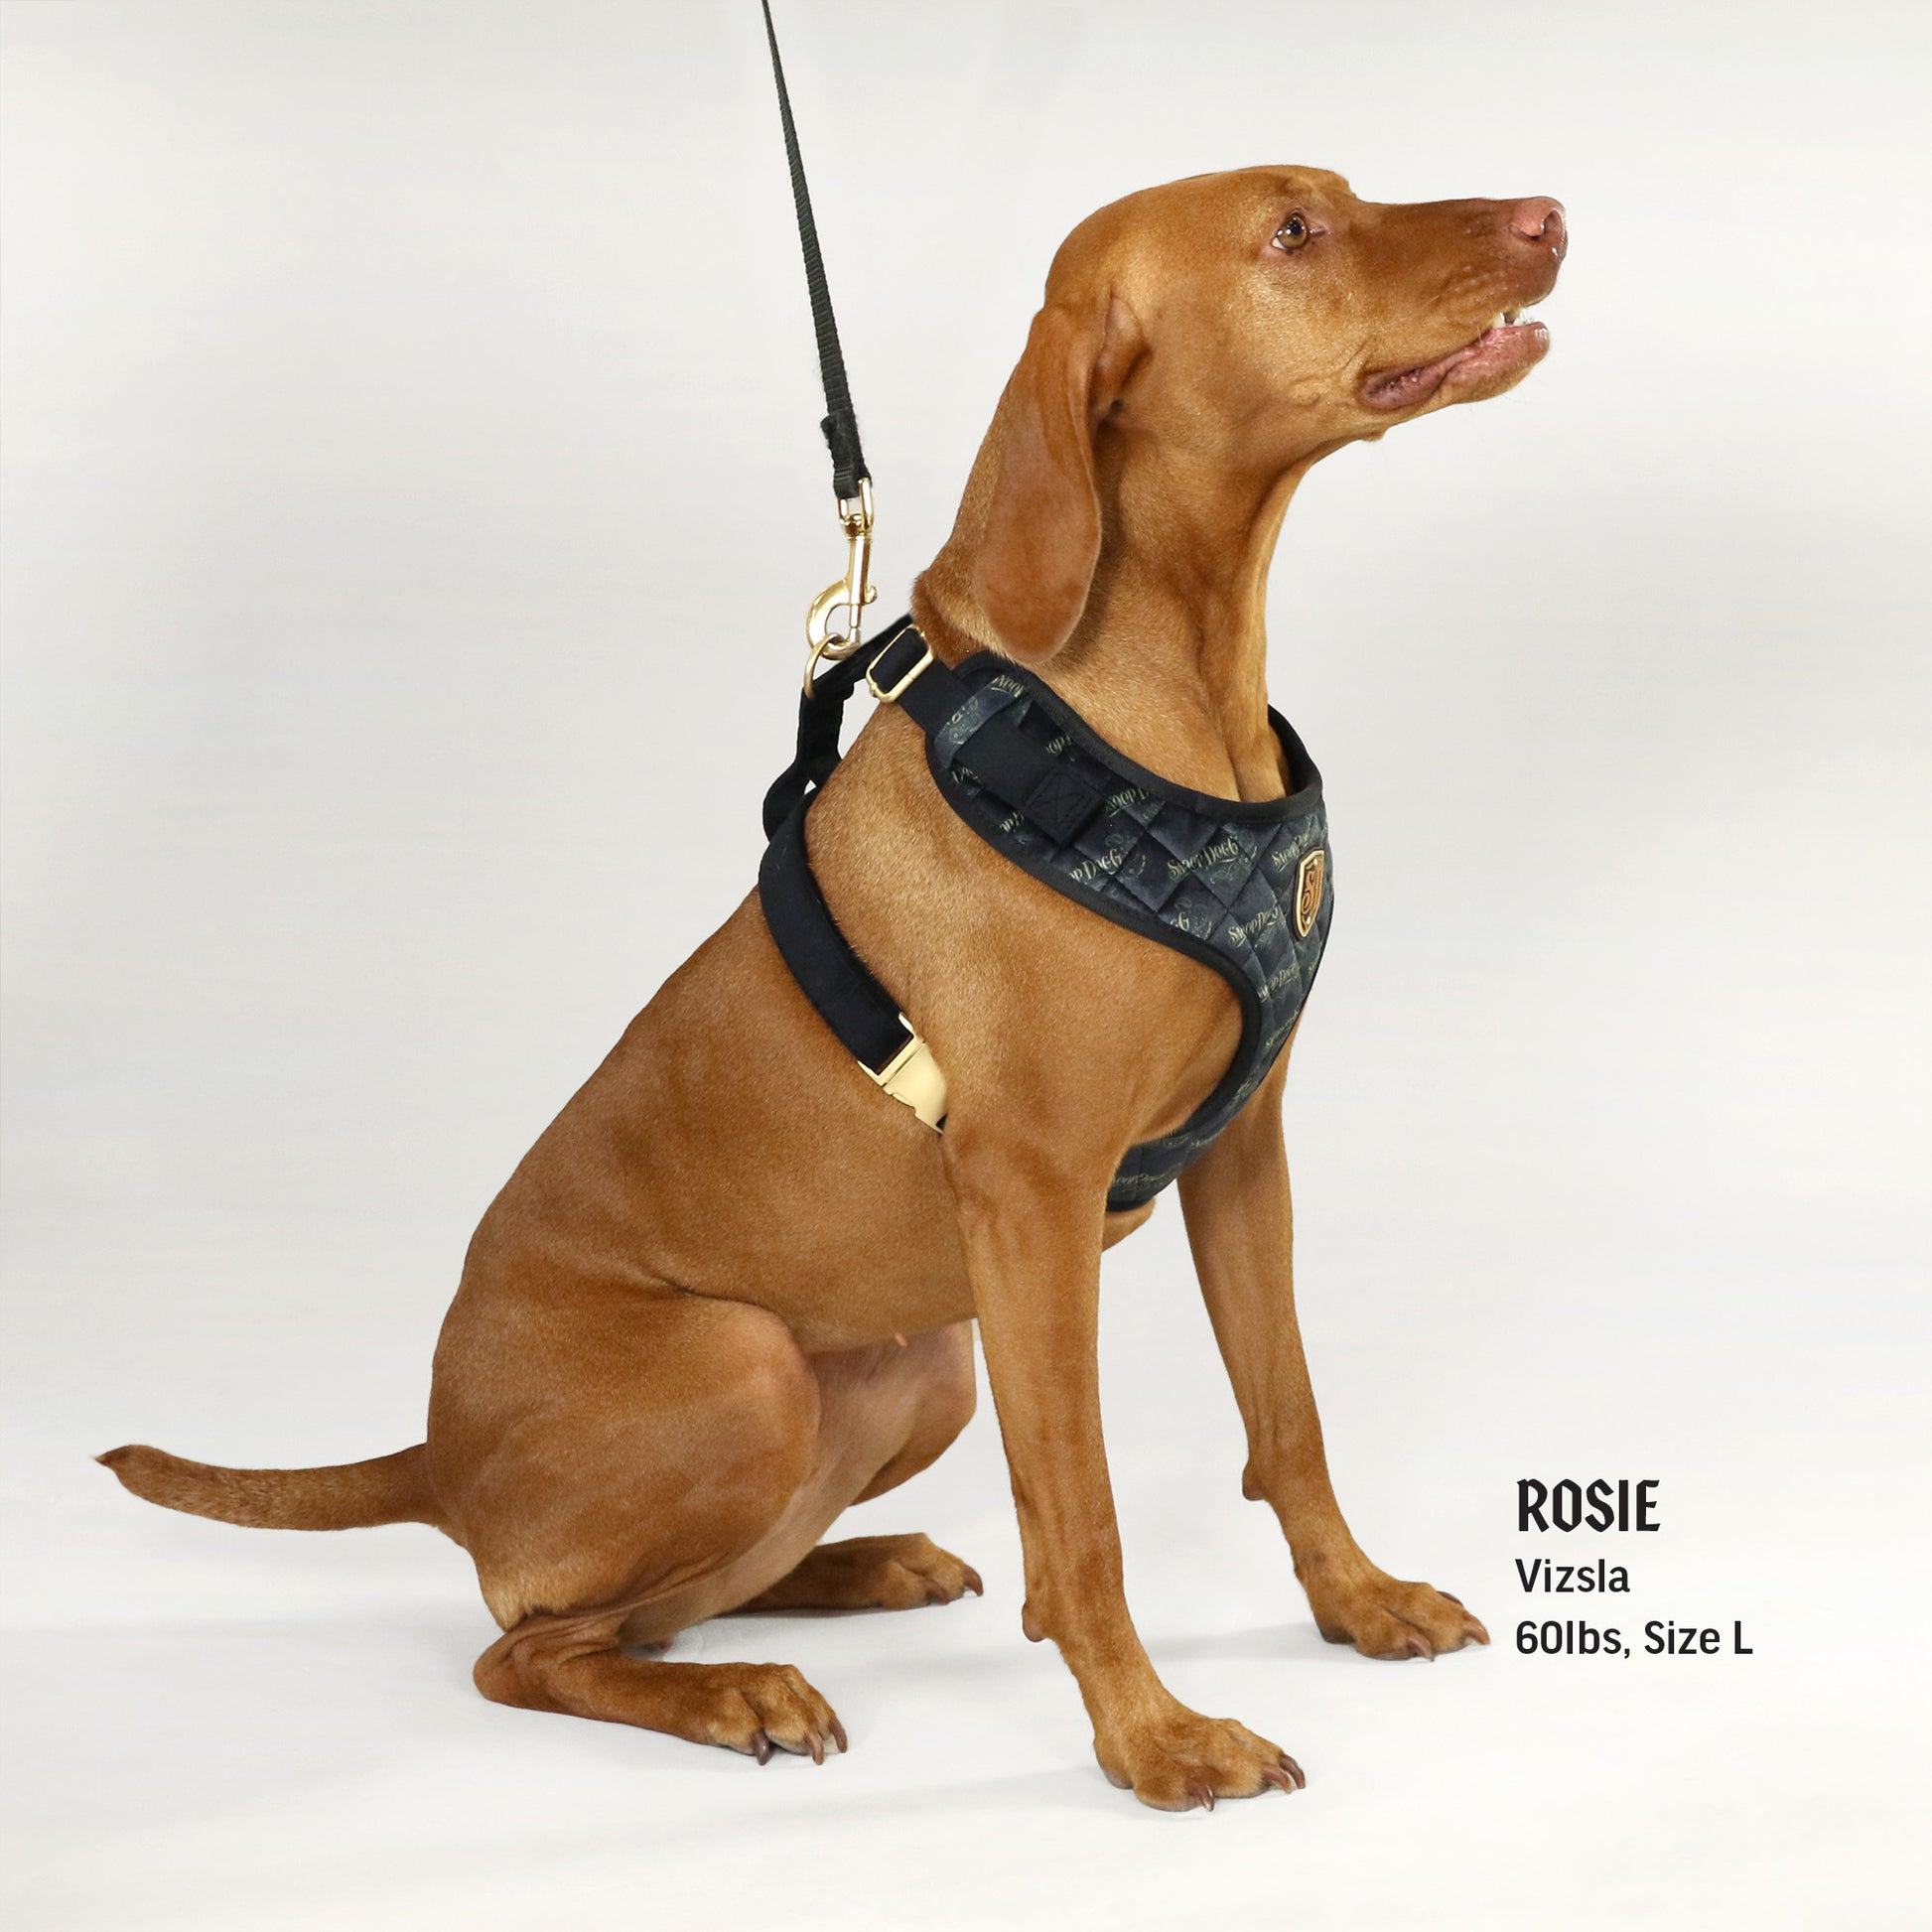 Rosie the Vizsla wearing the Deluxe Quilted Pet Harness in size Large.